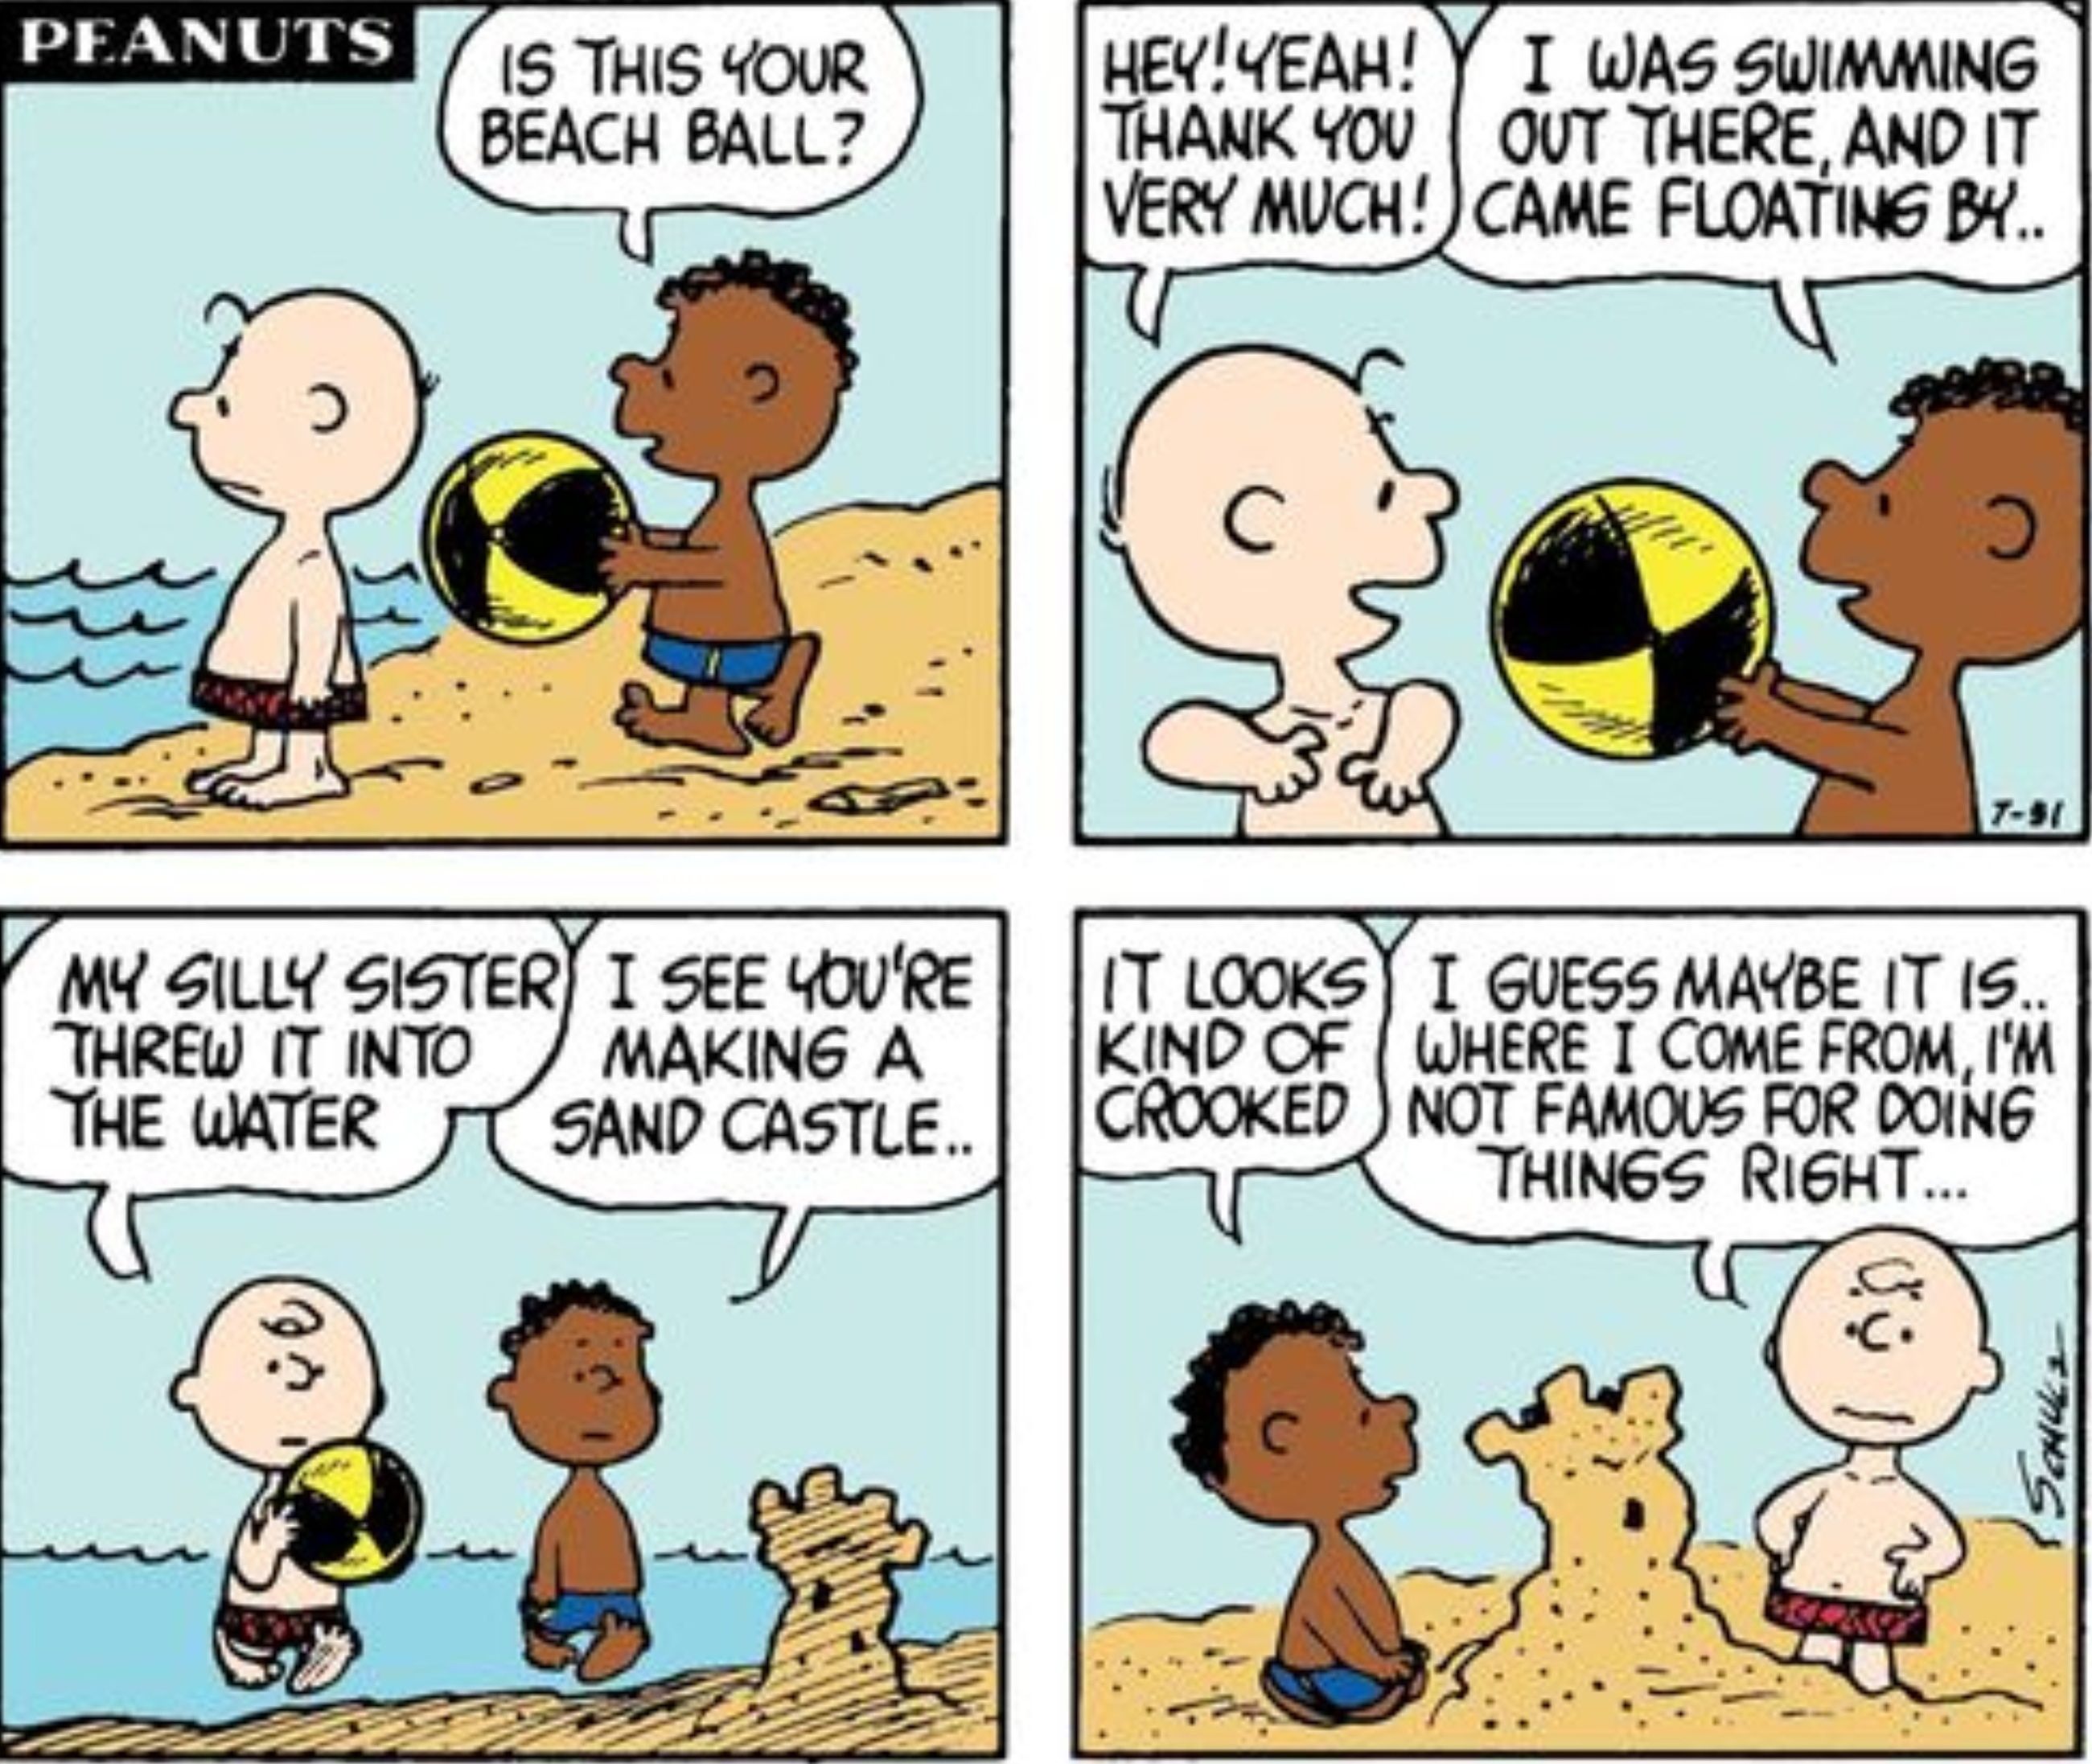 Charlie Brown and Franklin with a sandcastle in Peanuts.